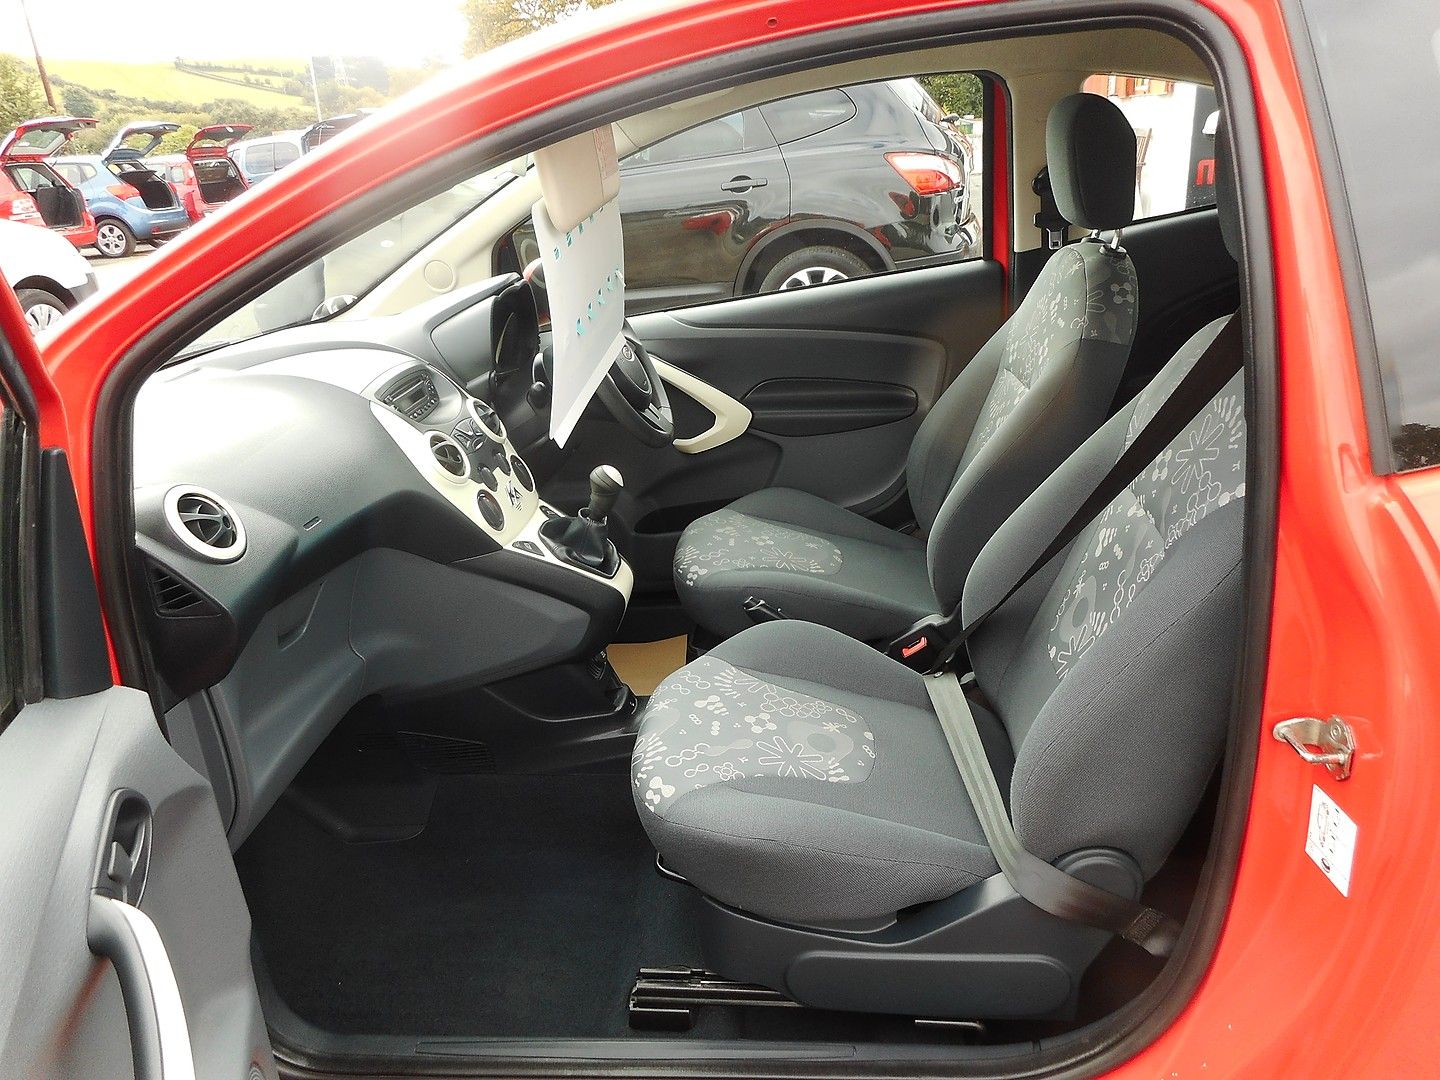 FORD Ka Style 1.2 69PS (2009) - Picture 7